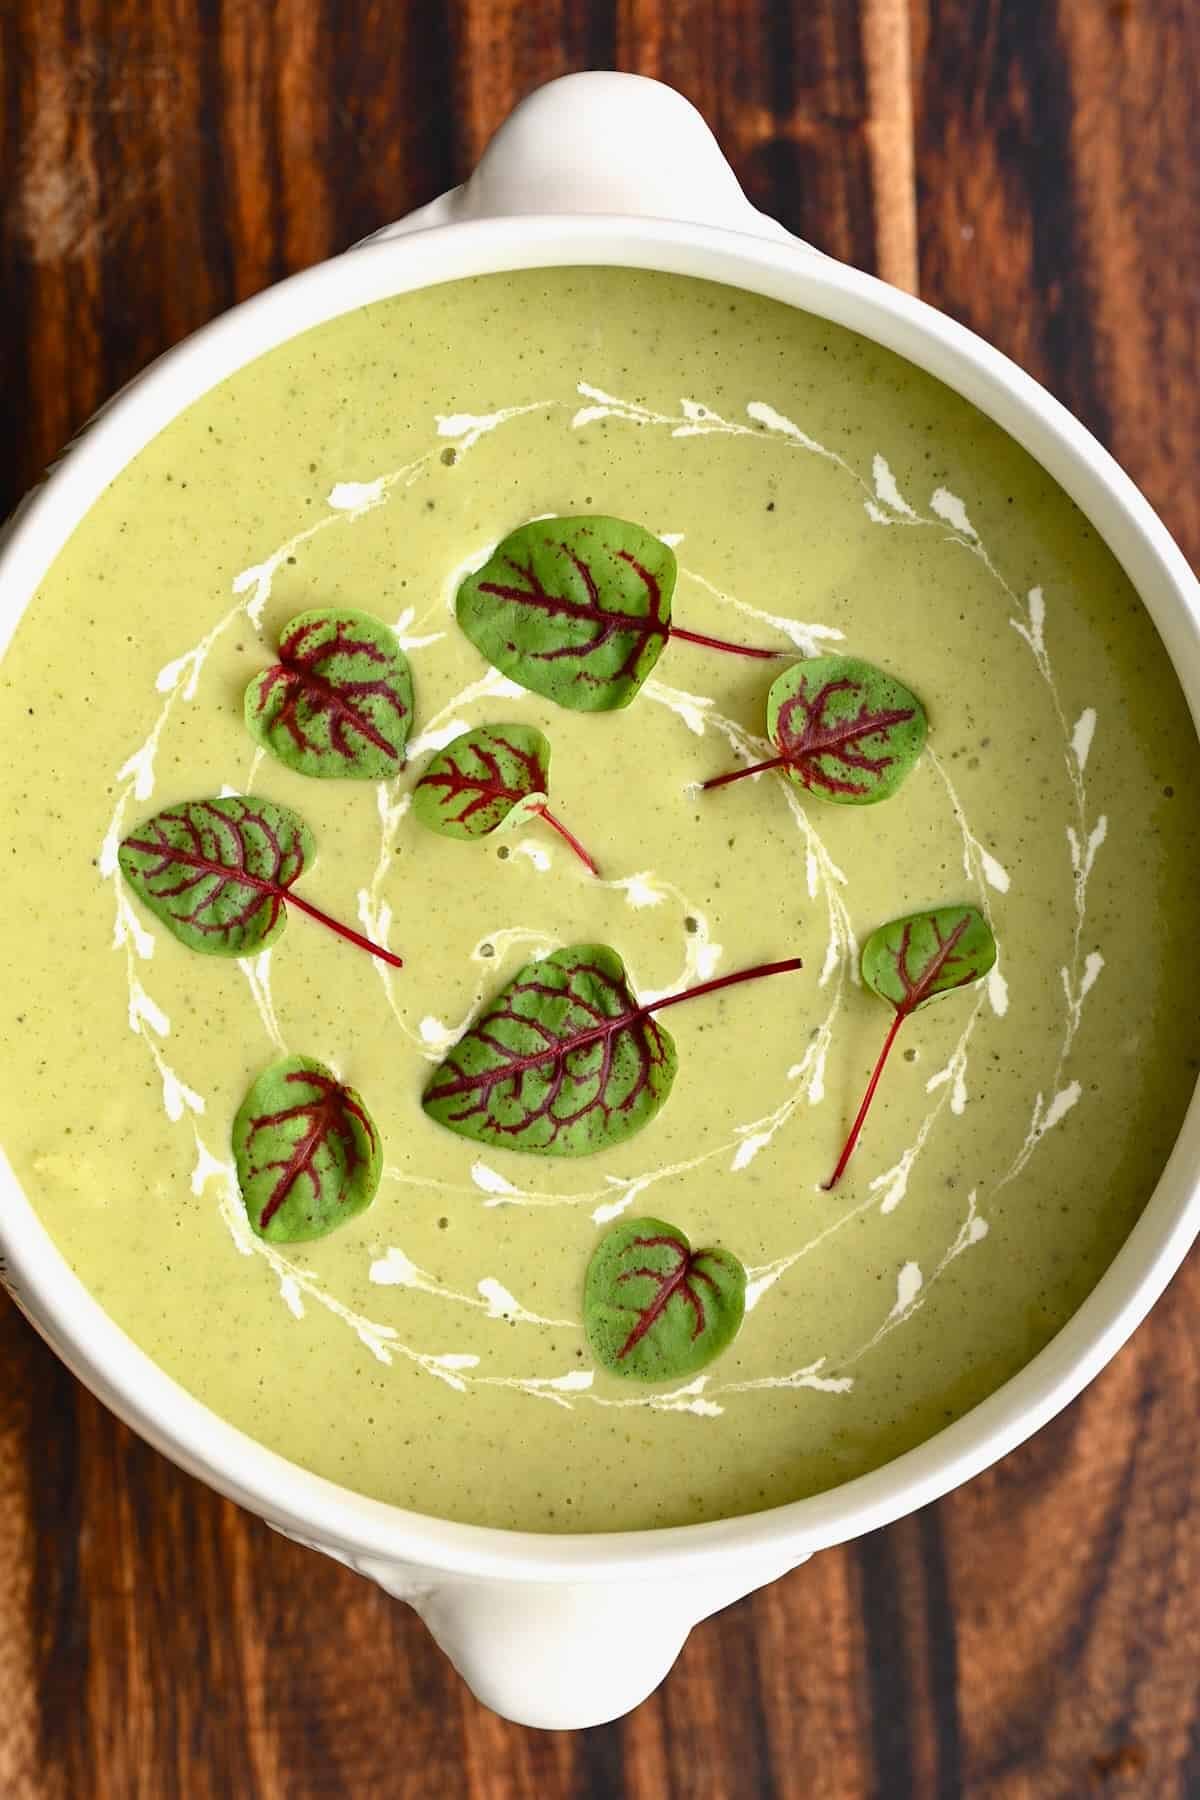 Panera Broccoli Chedar Soup topped with microherbs